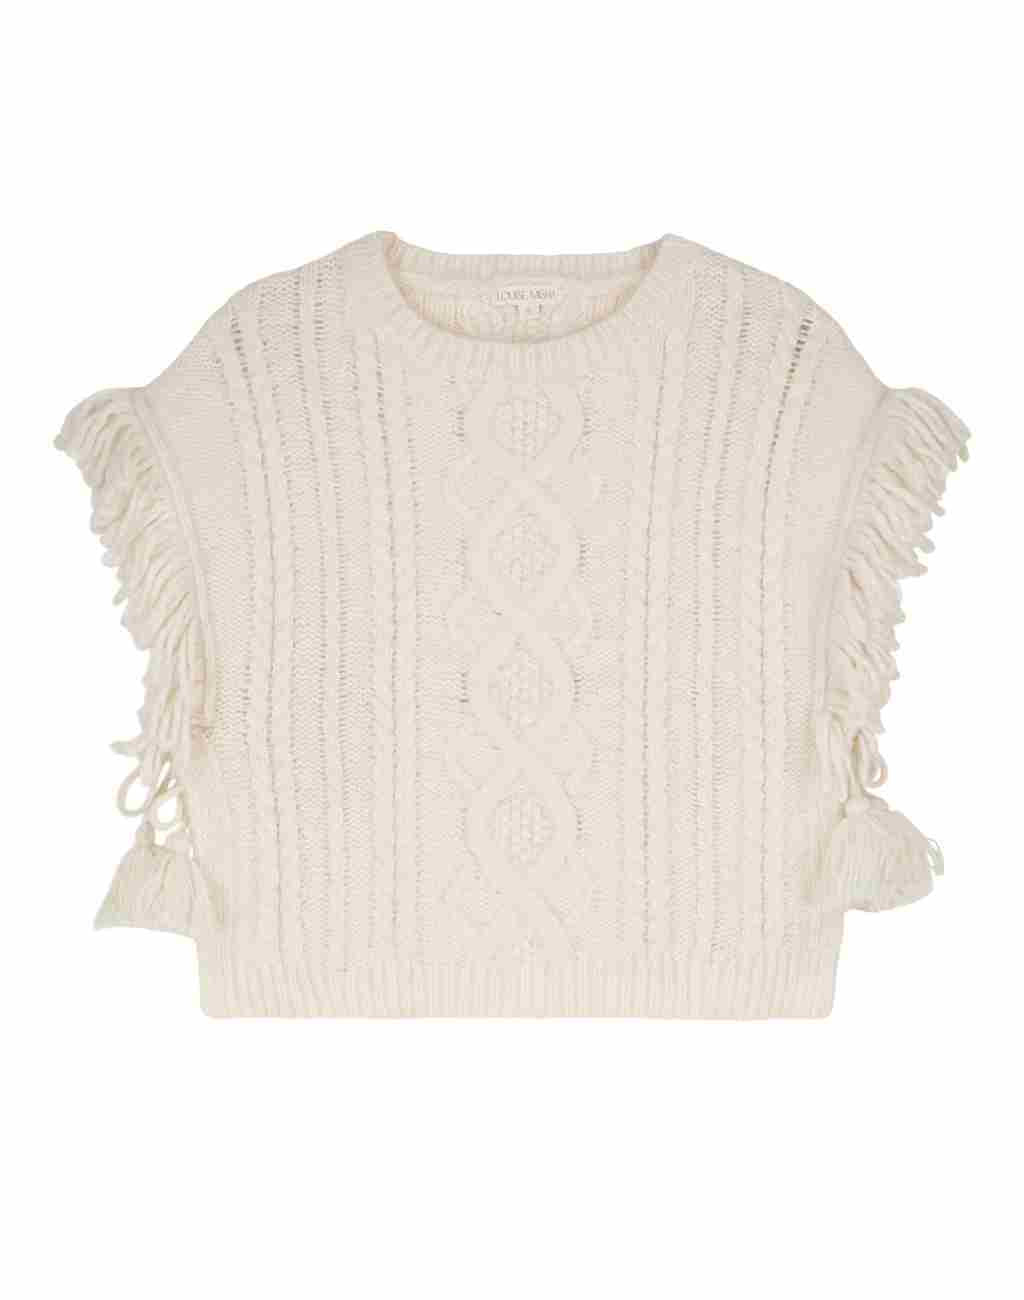 Sleeveless Knit Sighi Poncho with Fringe and Ties with Pompoms - Visit Nifty Louise Misha 